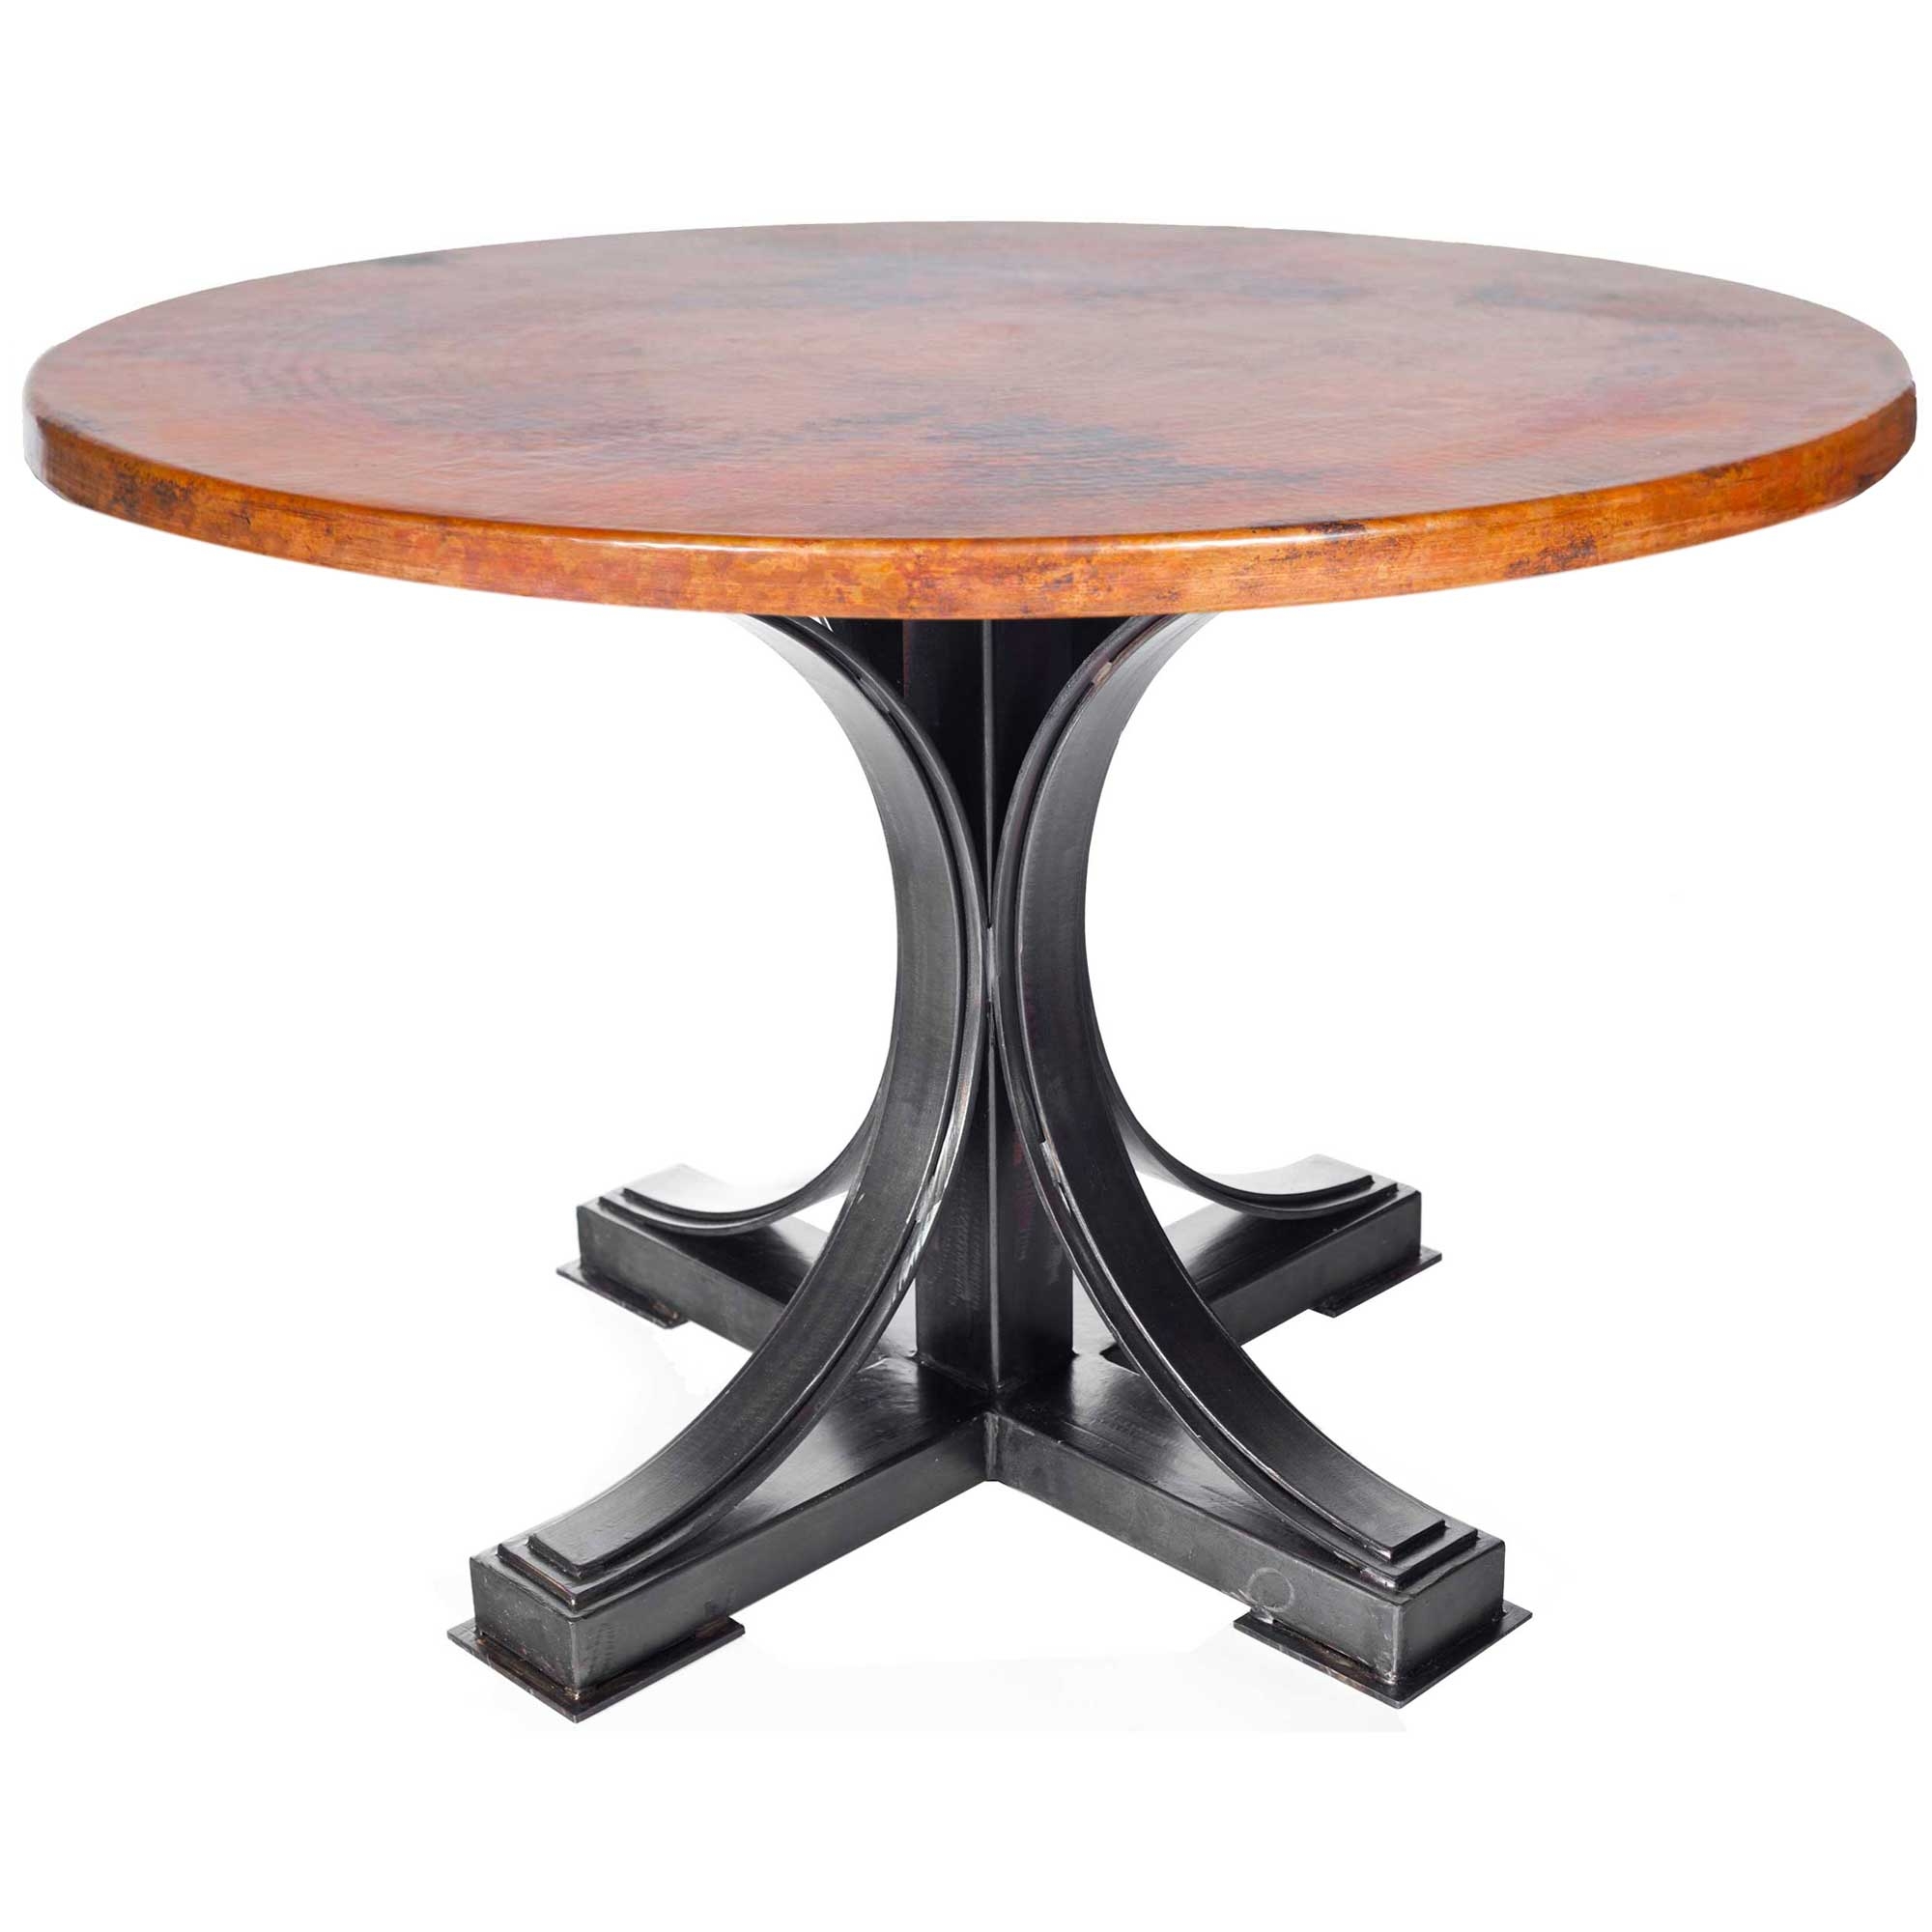 hammered copper dining table photo - 1